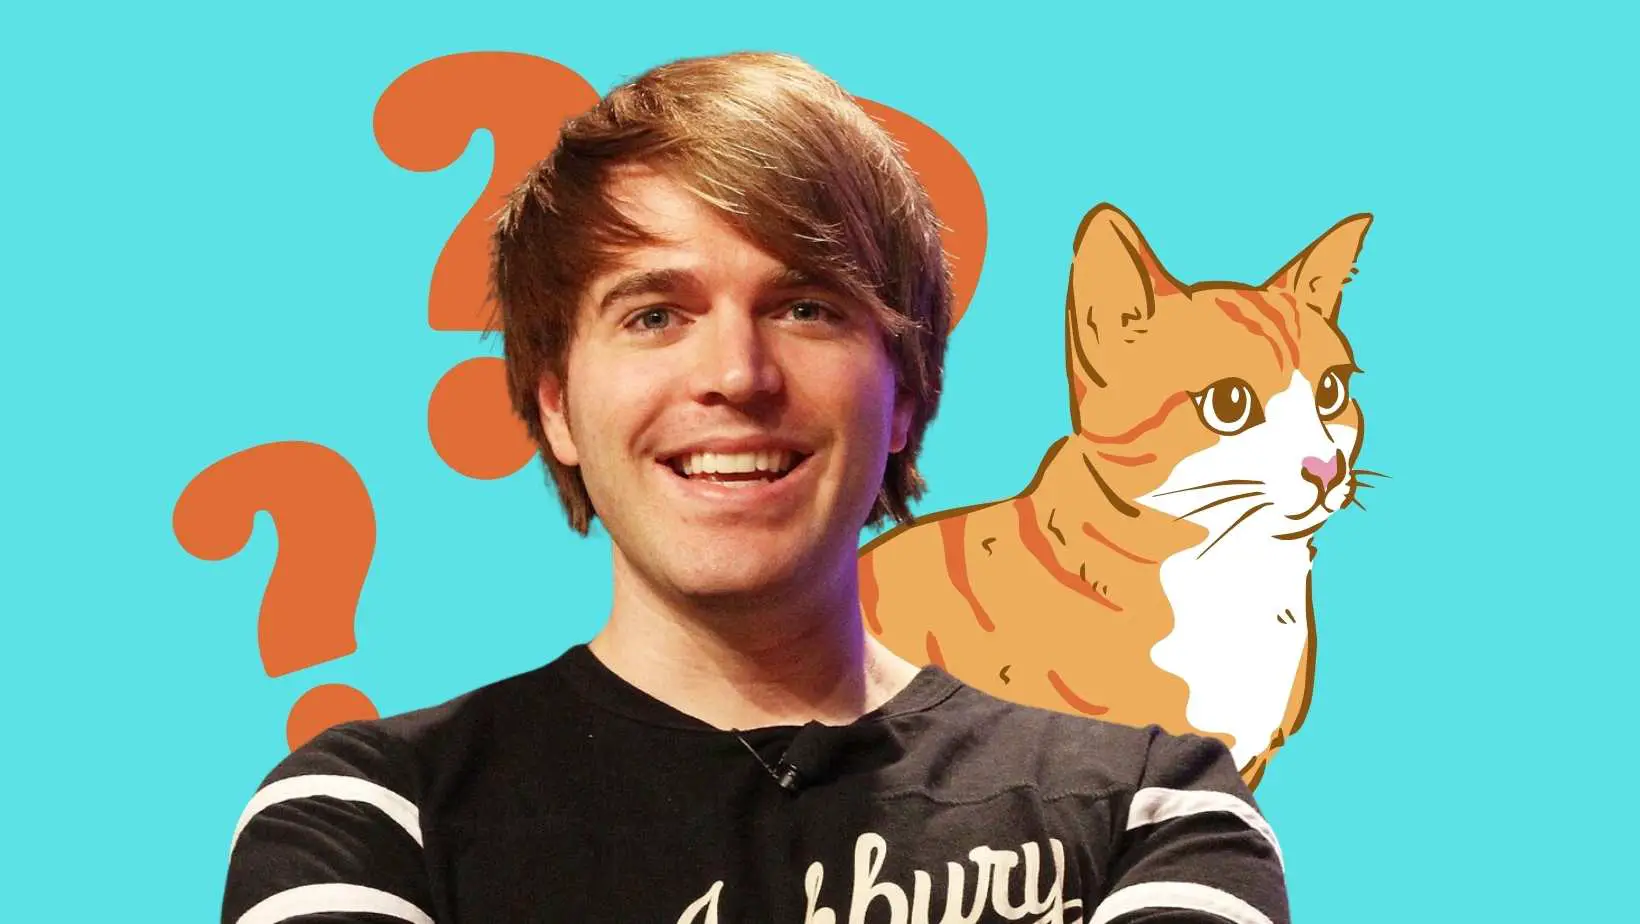 What did Shane Dawson do to his cat?